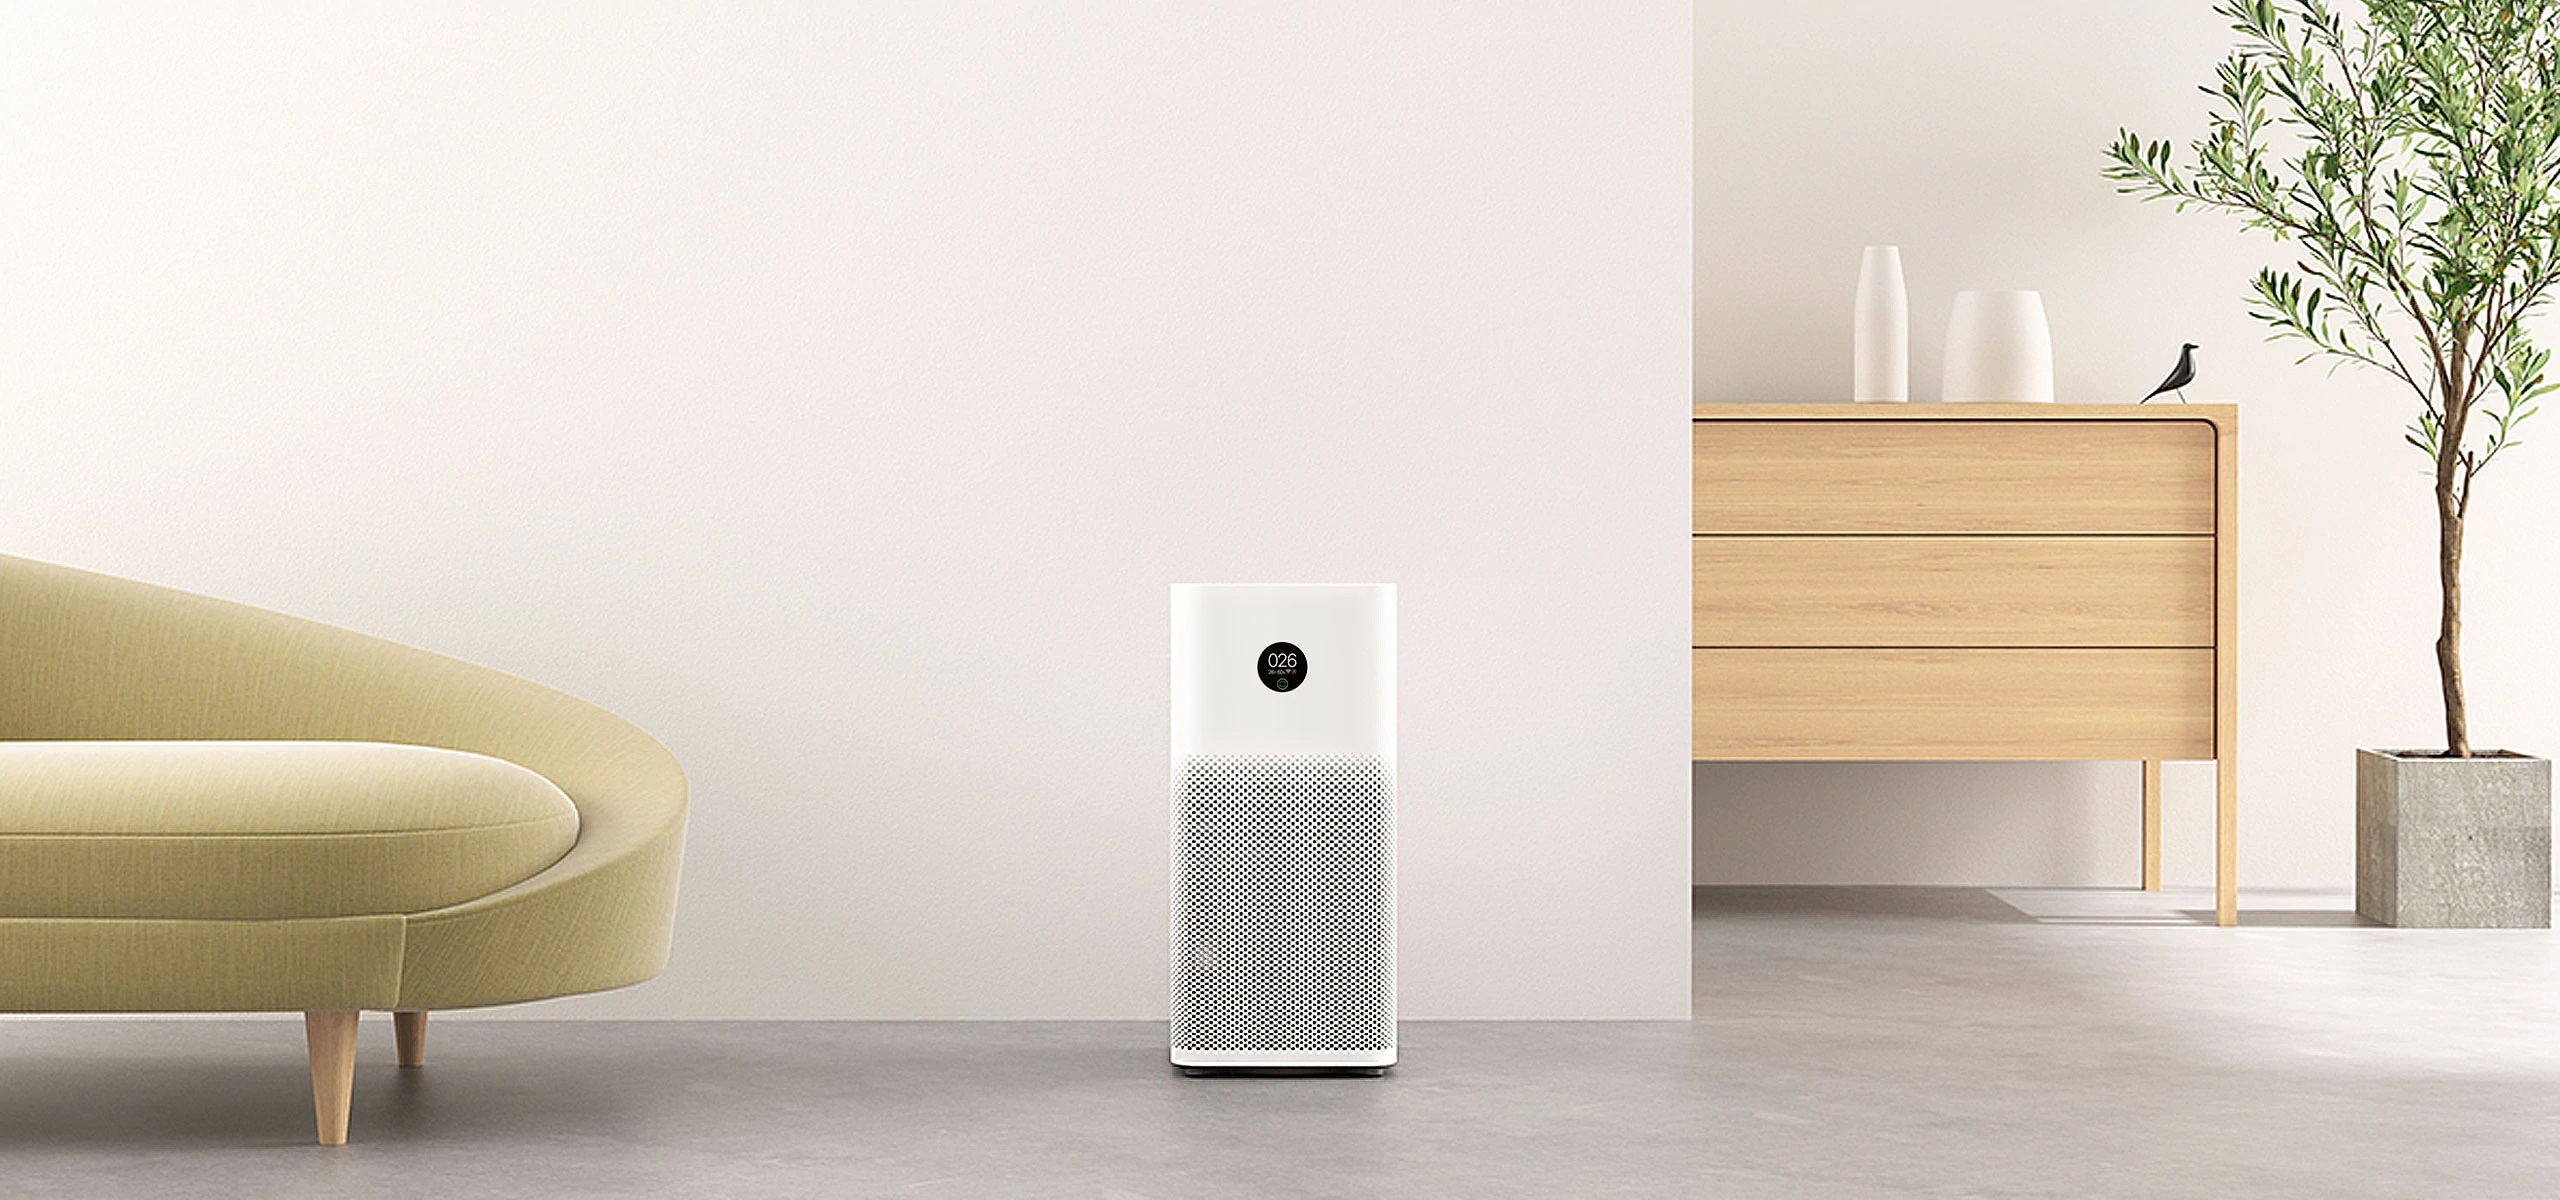 Buy Official and Original Xiaomi 3H Air Purifier in Pakistan at Dab Lew Tech